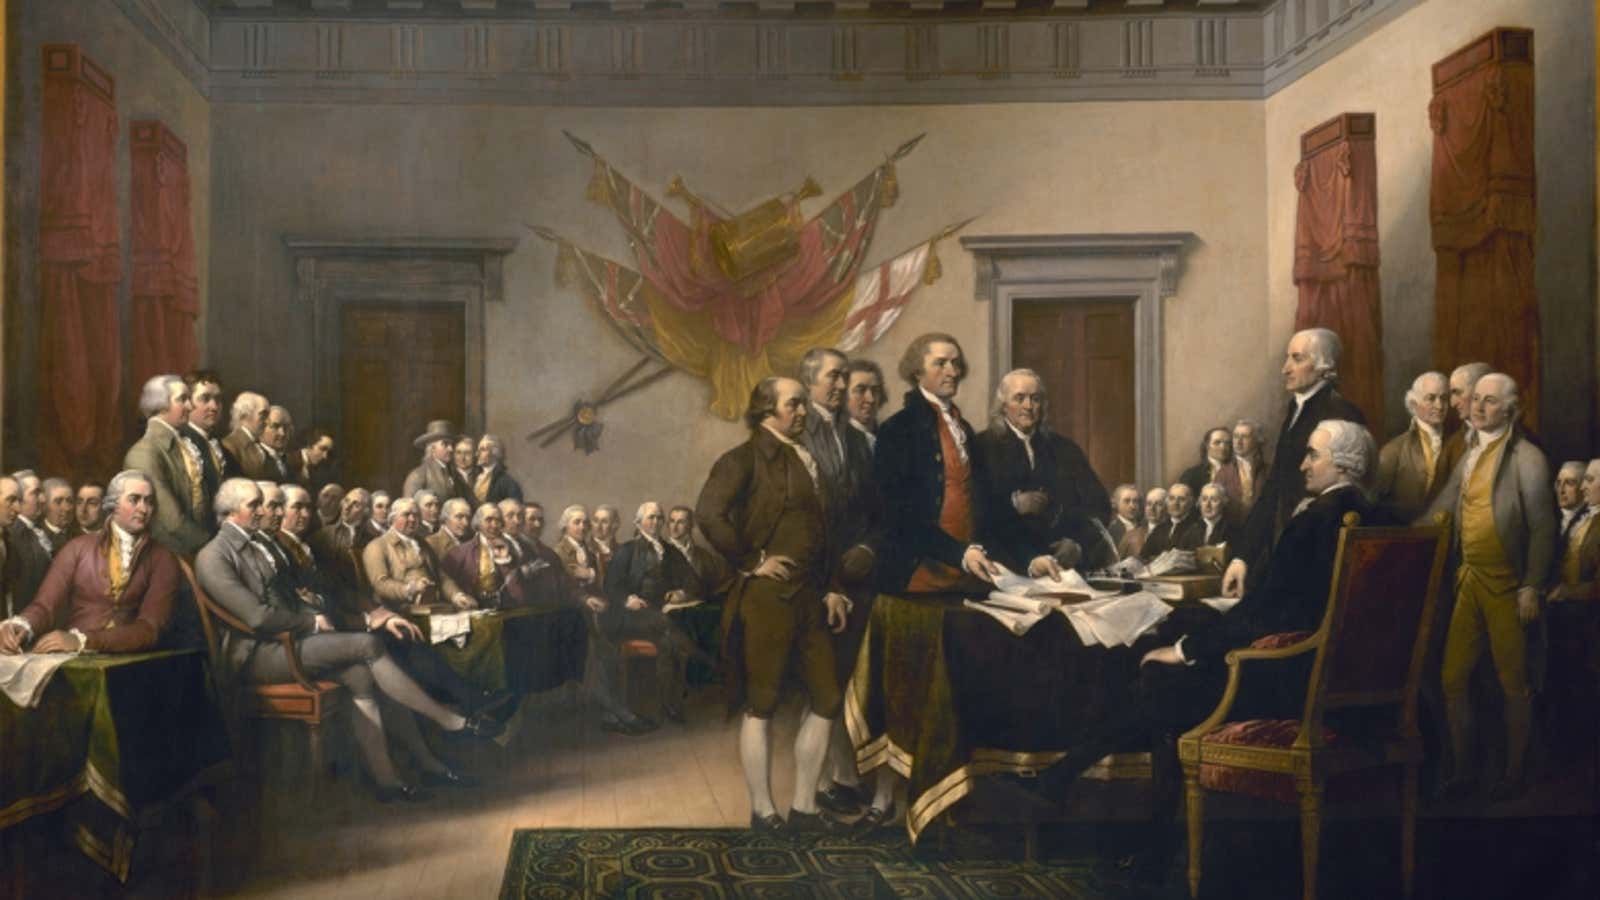 One man in this painting may have repudiated his signature on the Declaration of Independence under pressure.